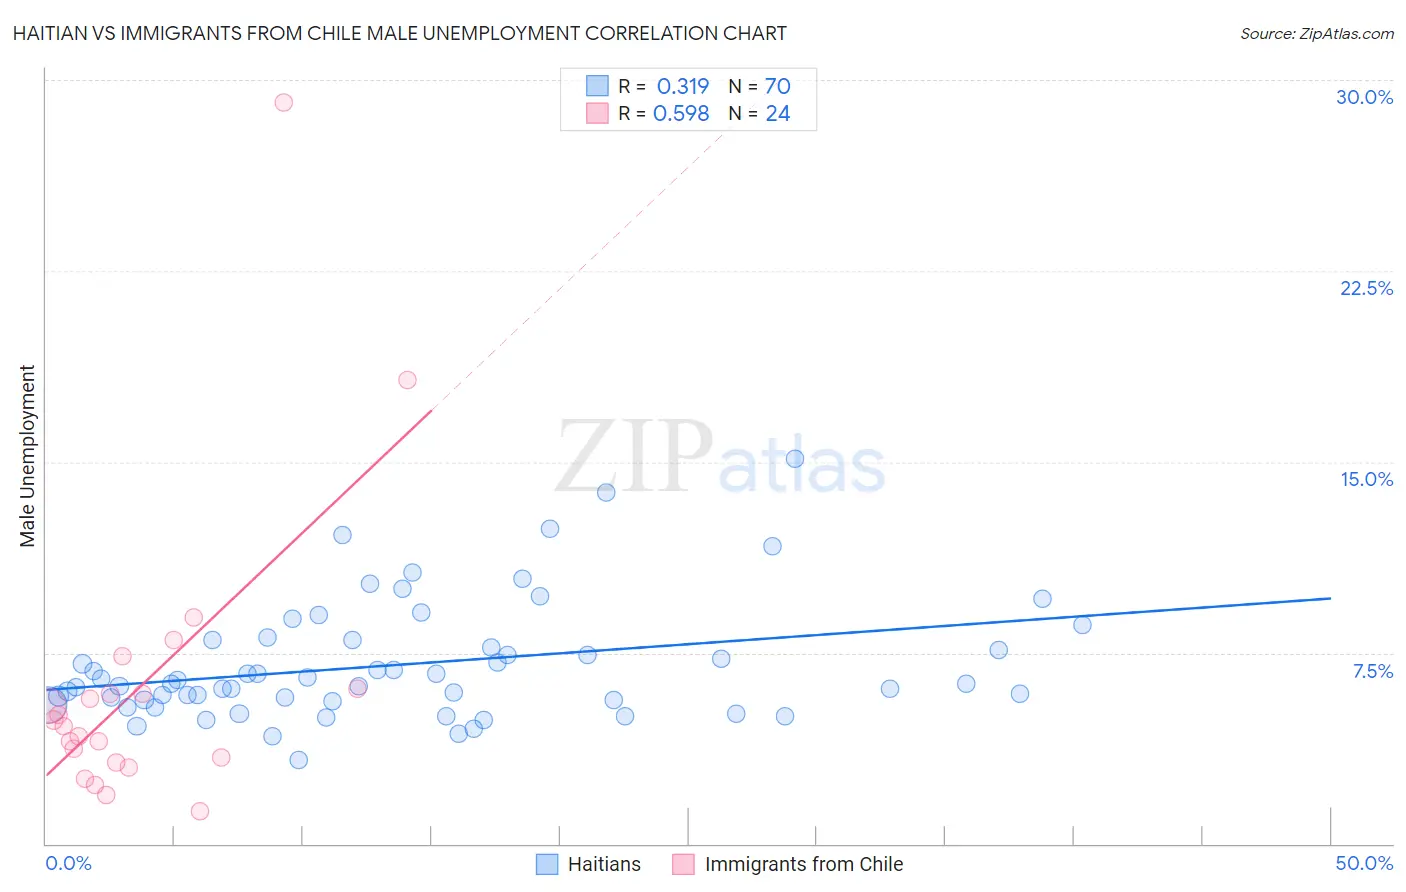 Haitian vs Immigrants from Chile Male Unemployment